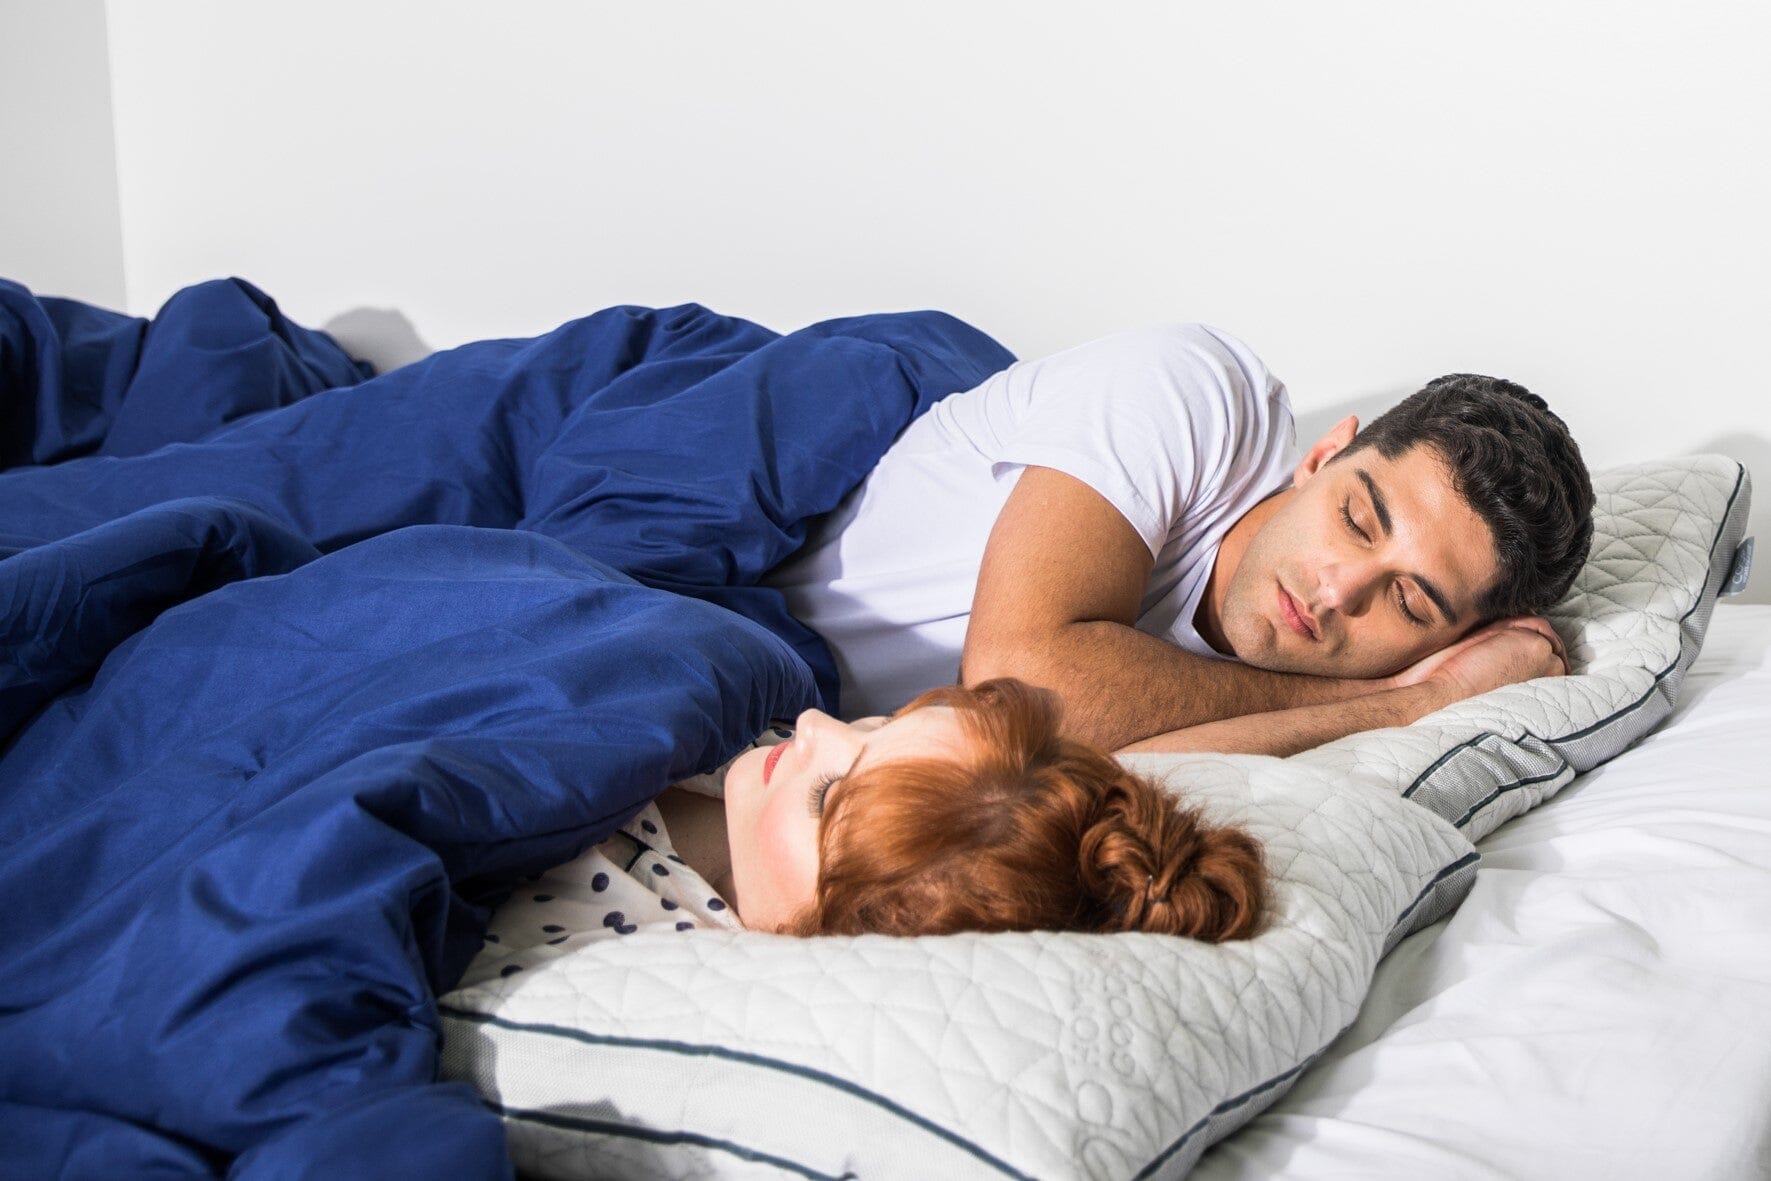 Expert Advice for Snorers and Their Partners